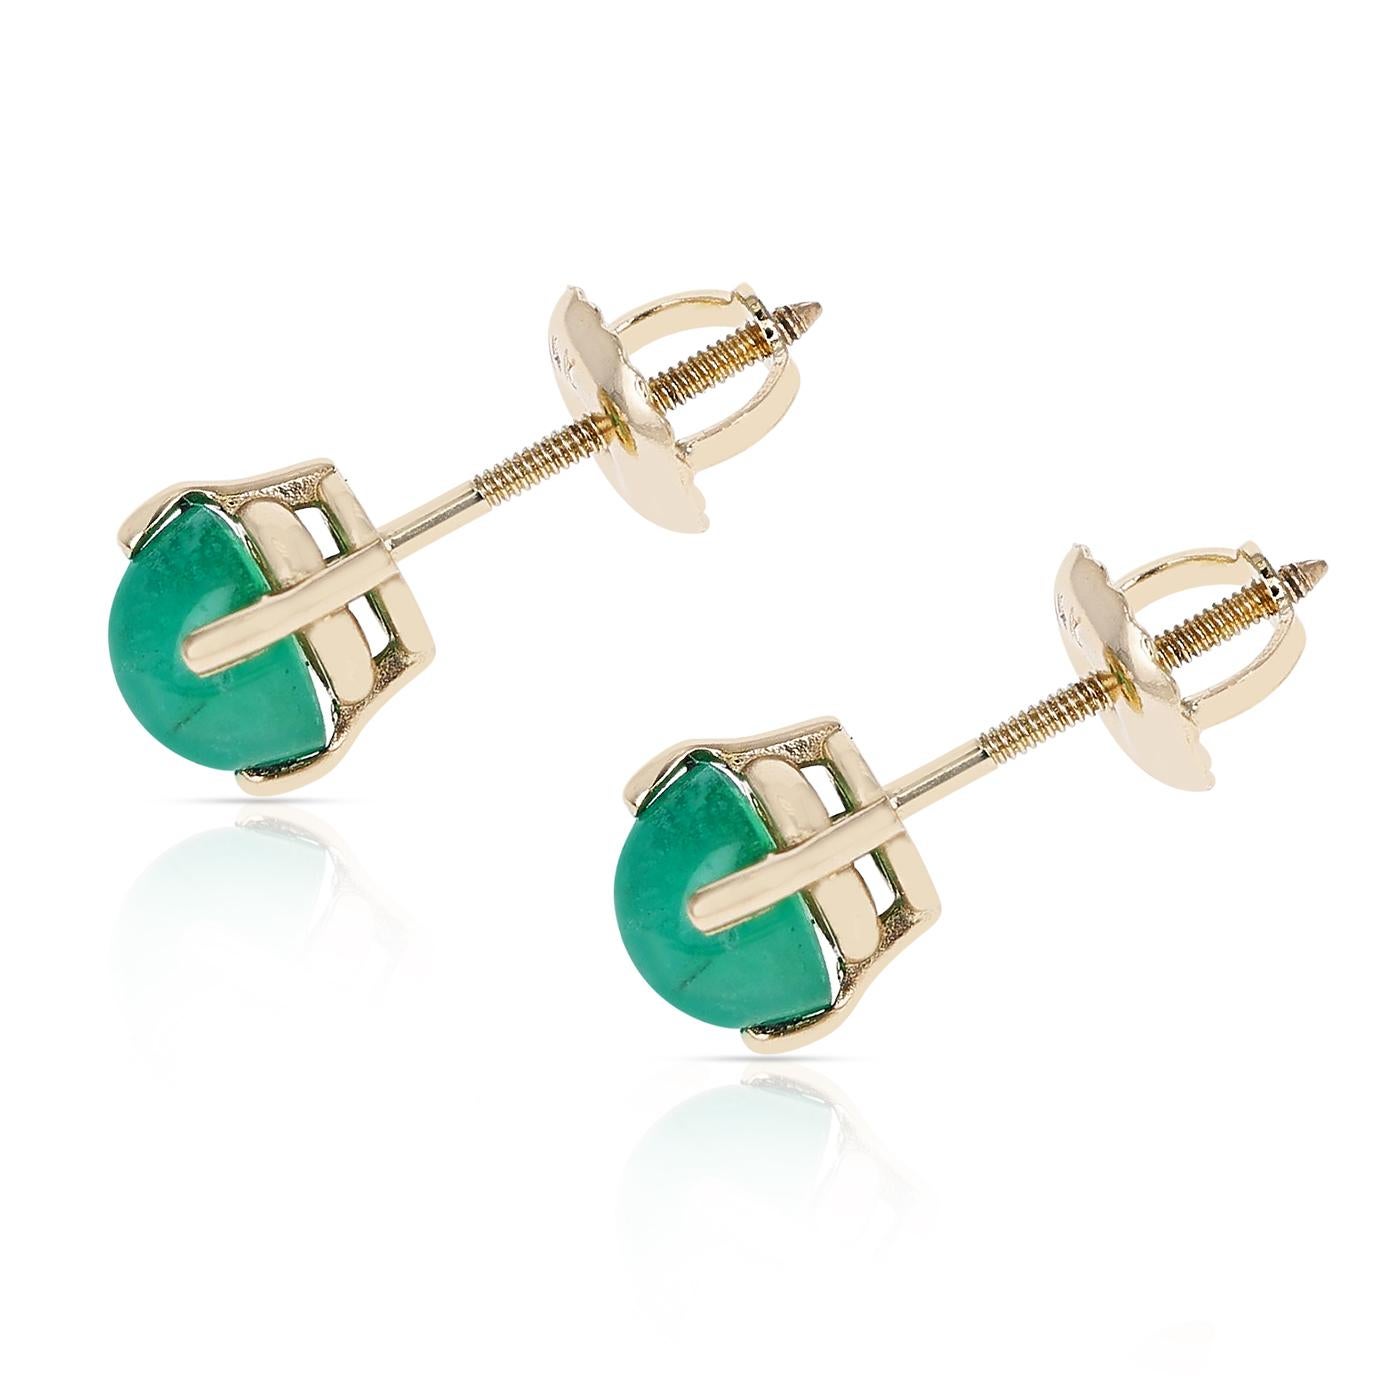 A pair of 5MM Emerald Round Cabochon Stud Earrings made in 14 Karat Yellow Gold. The total stone weight is 1.24 carats.